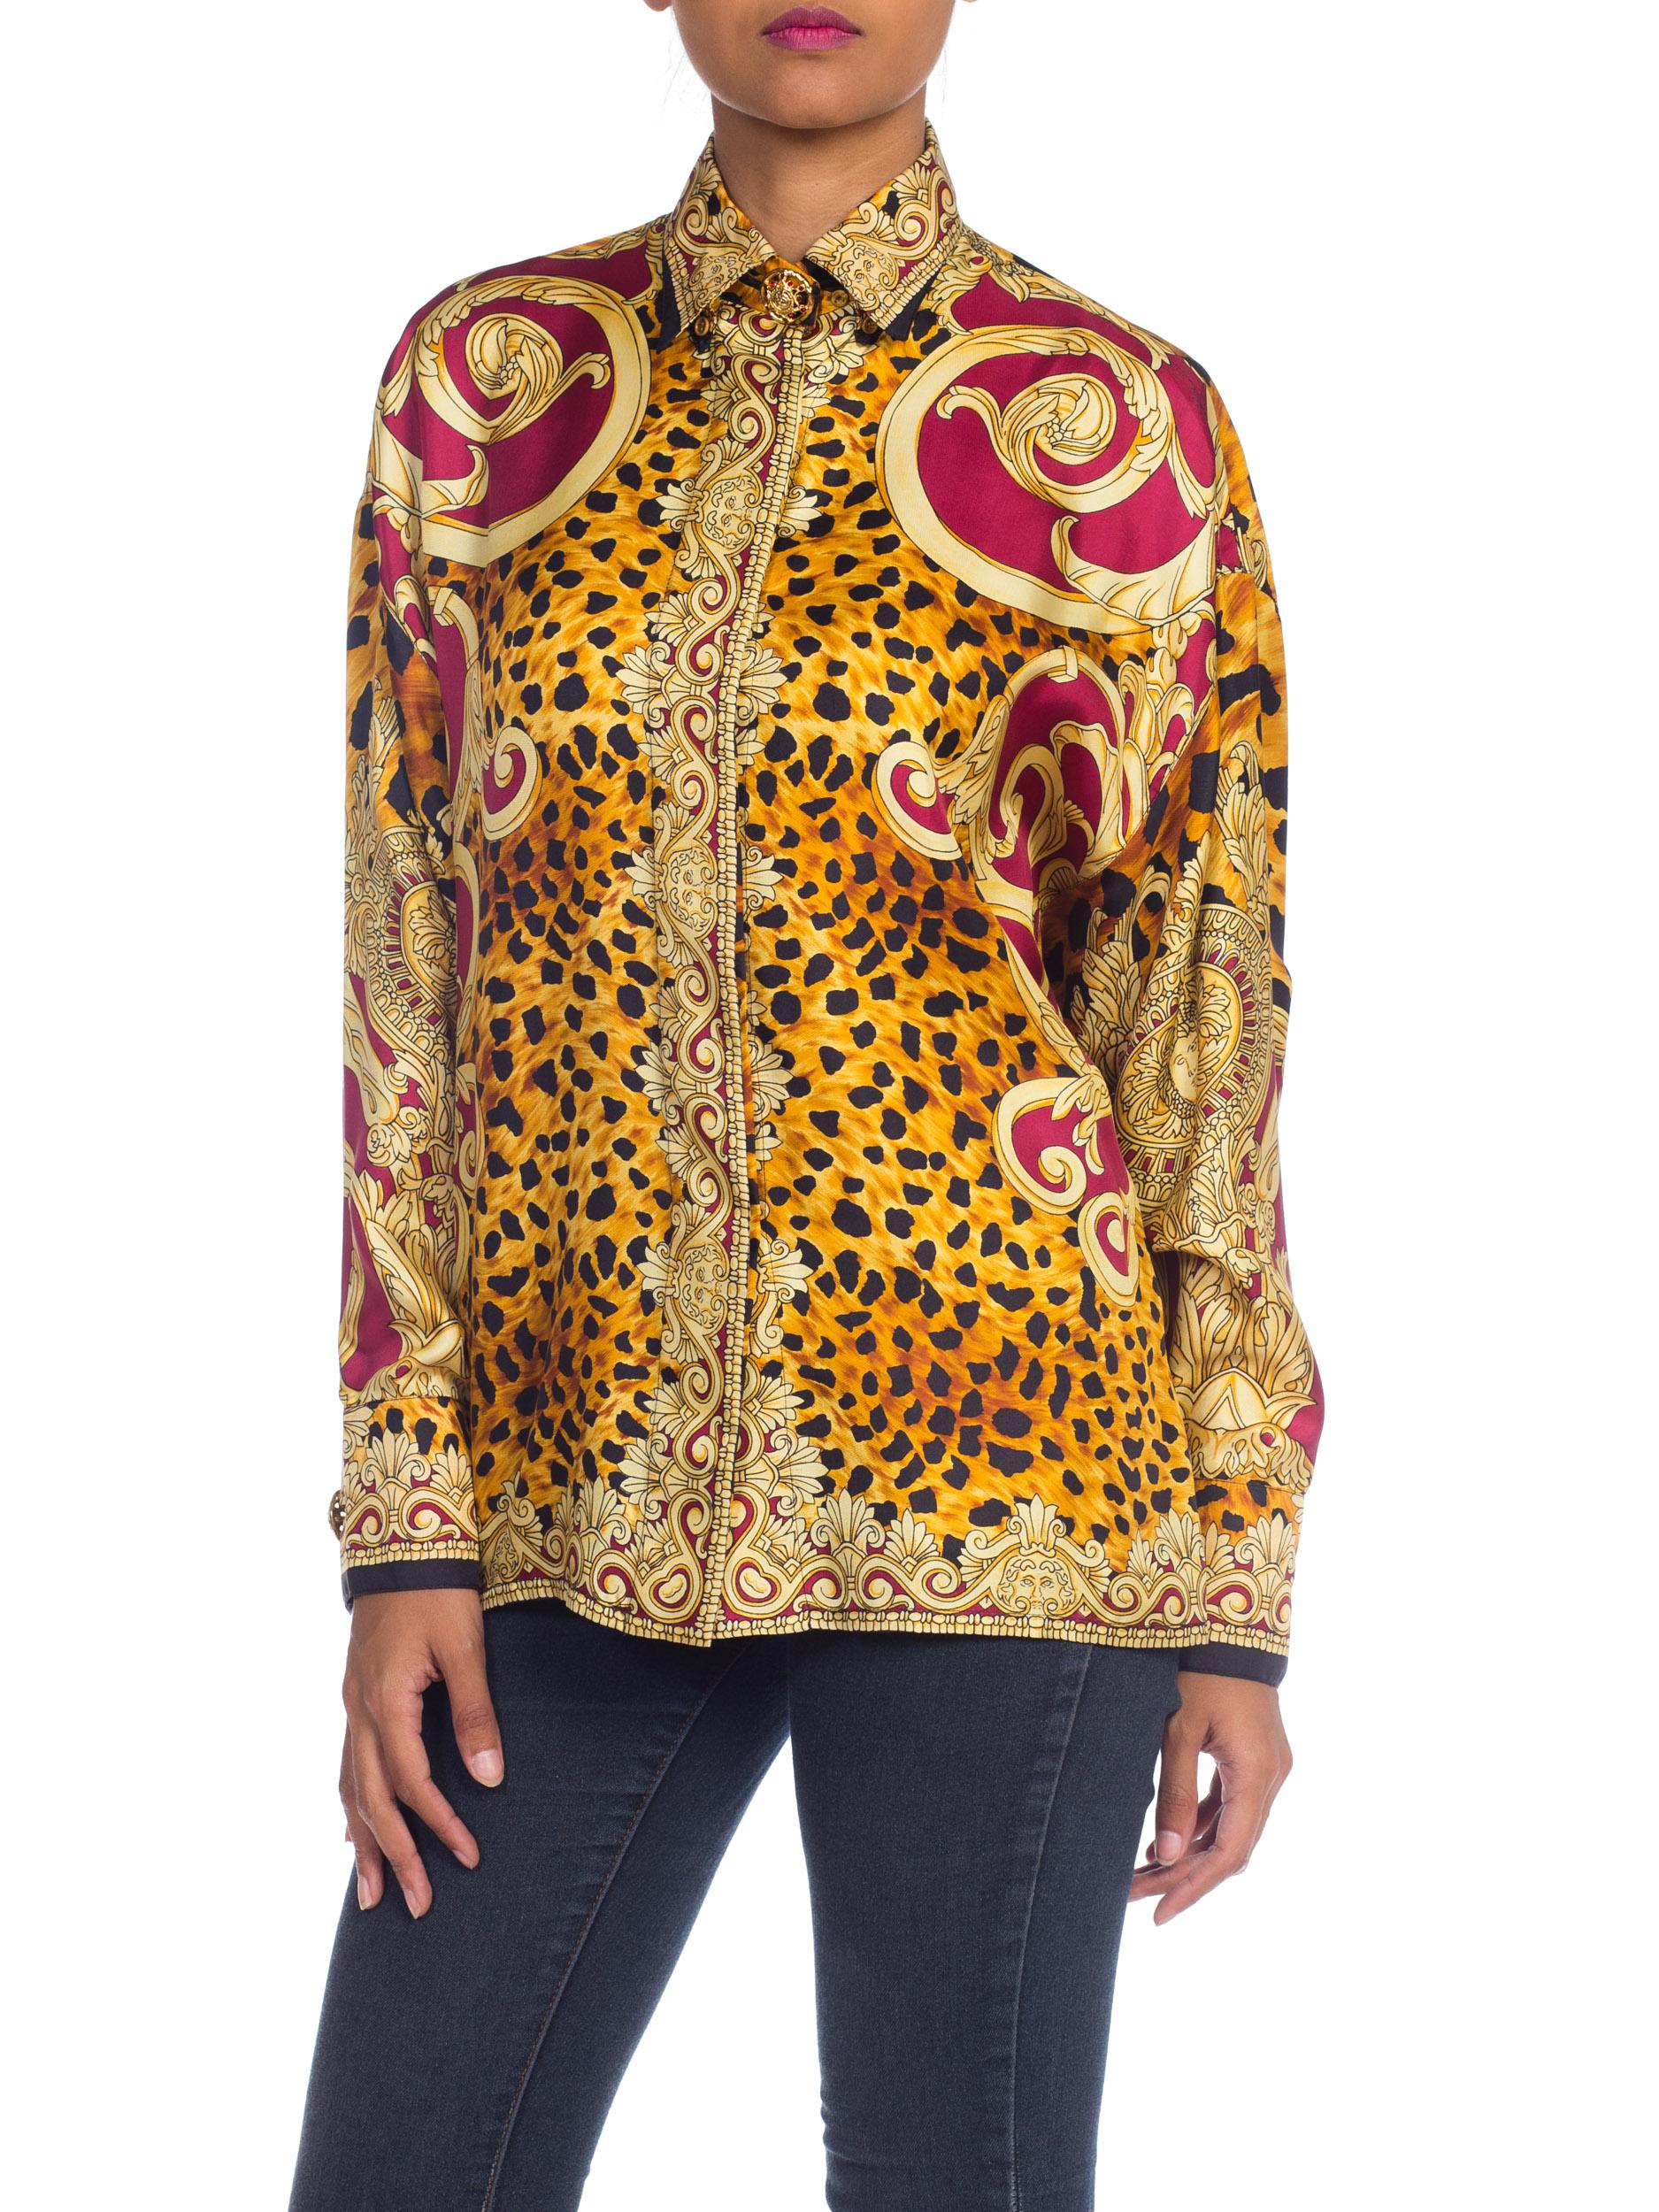 1990S GIANNI VERSACE Gold Baroque & Leopard Silk Shirt With Crystals Buttons 6